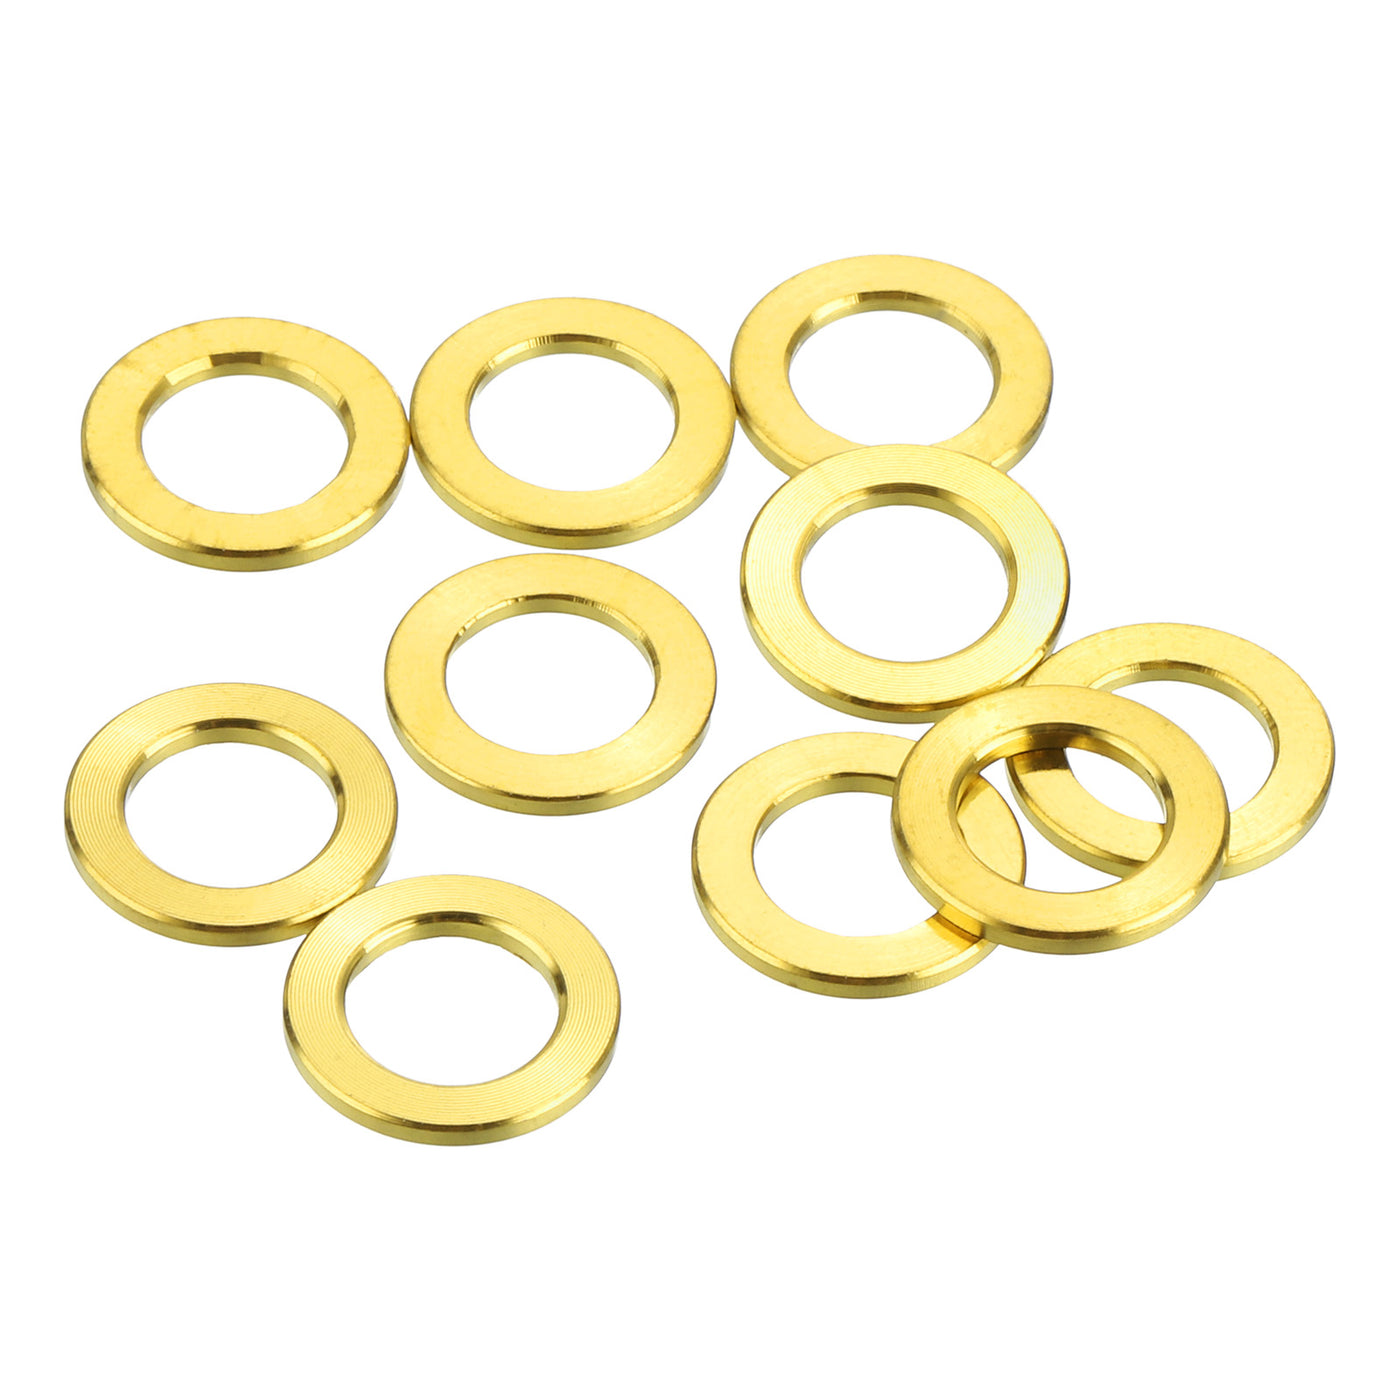 uxcell Uxcell 10 Pcs M6 Titanium Flat Washer Metric Flat Washer Gold